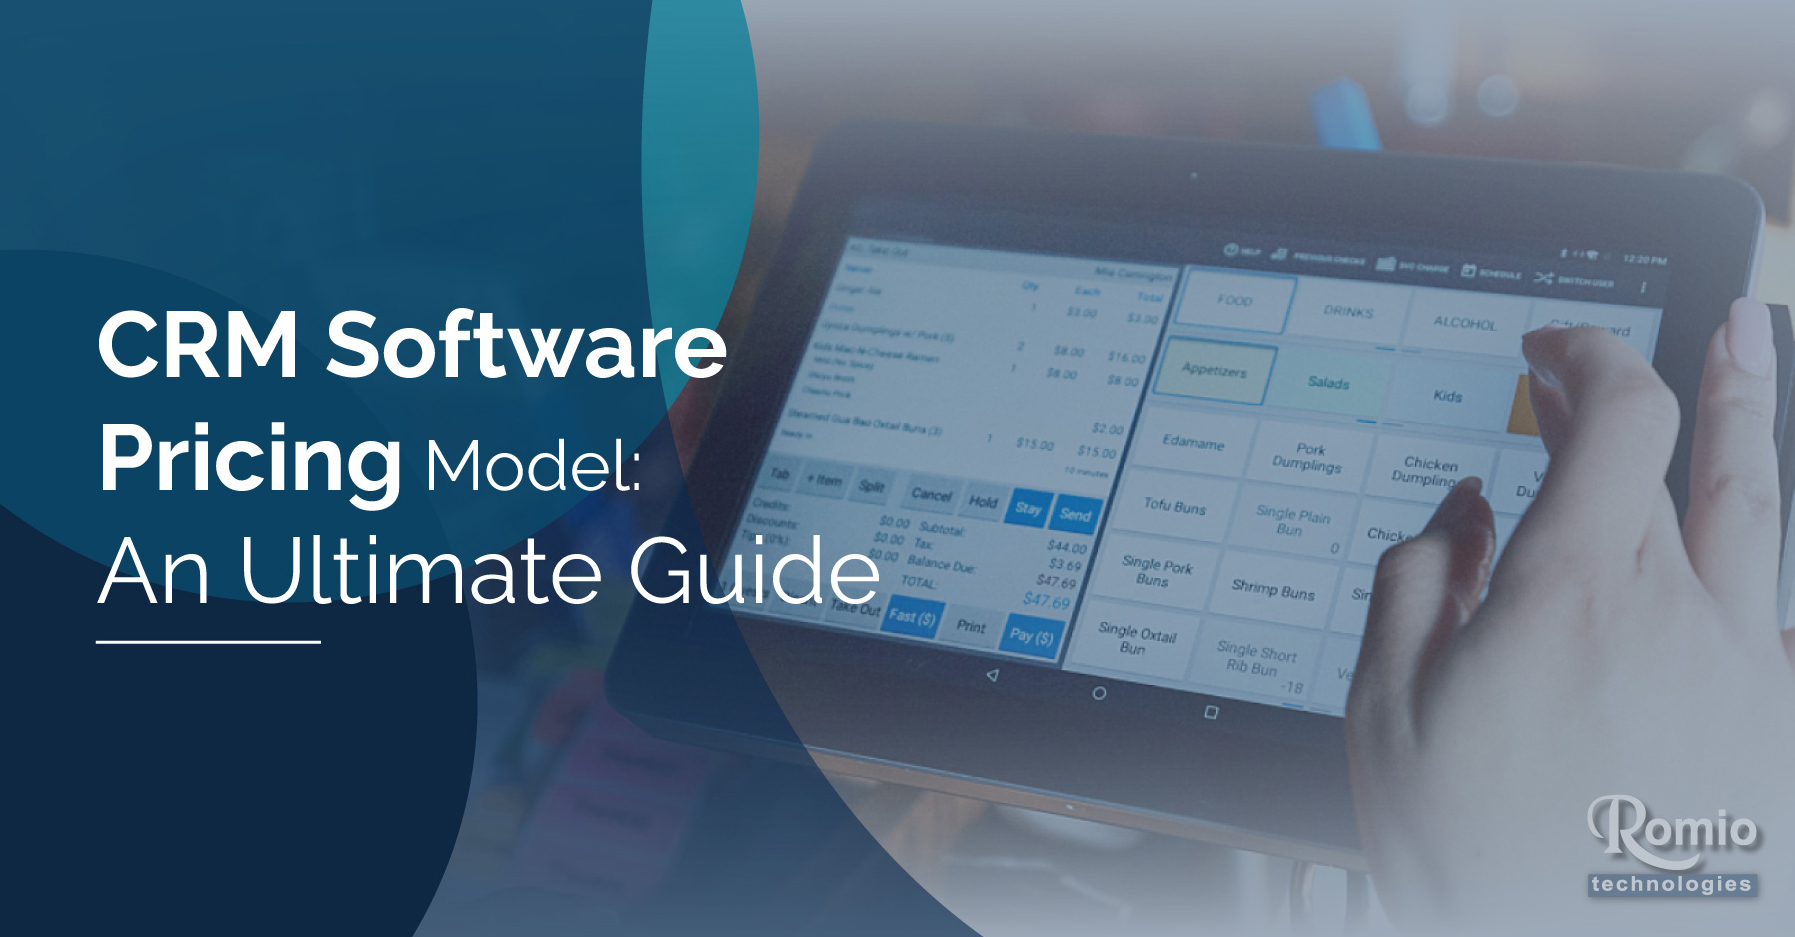 CRM Software pricing Model: An Ultimate Guide